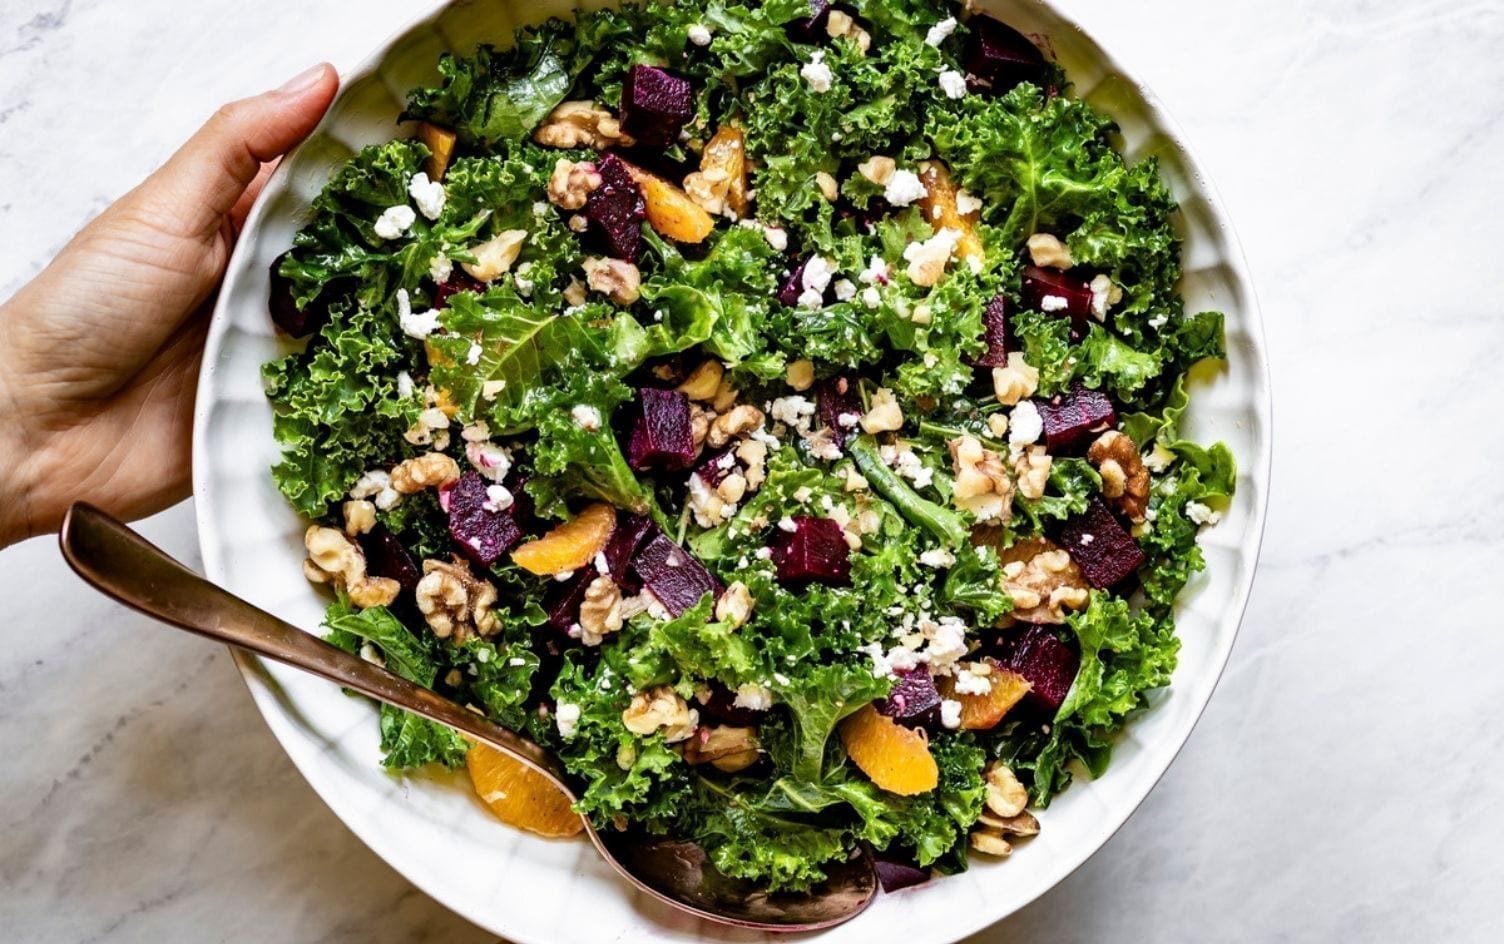 Roasted Beet Kale Salad with Candied Walnuts